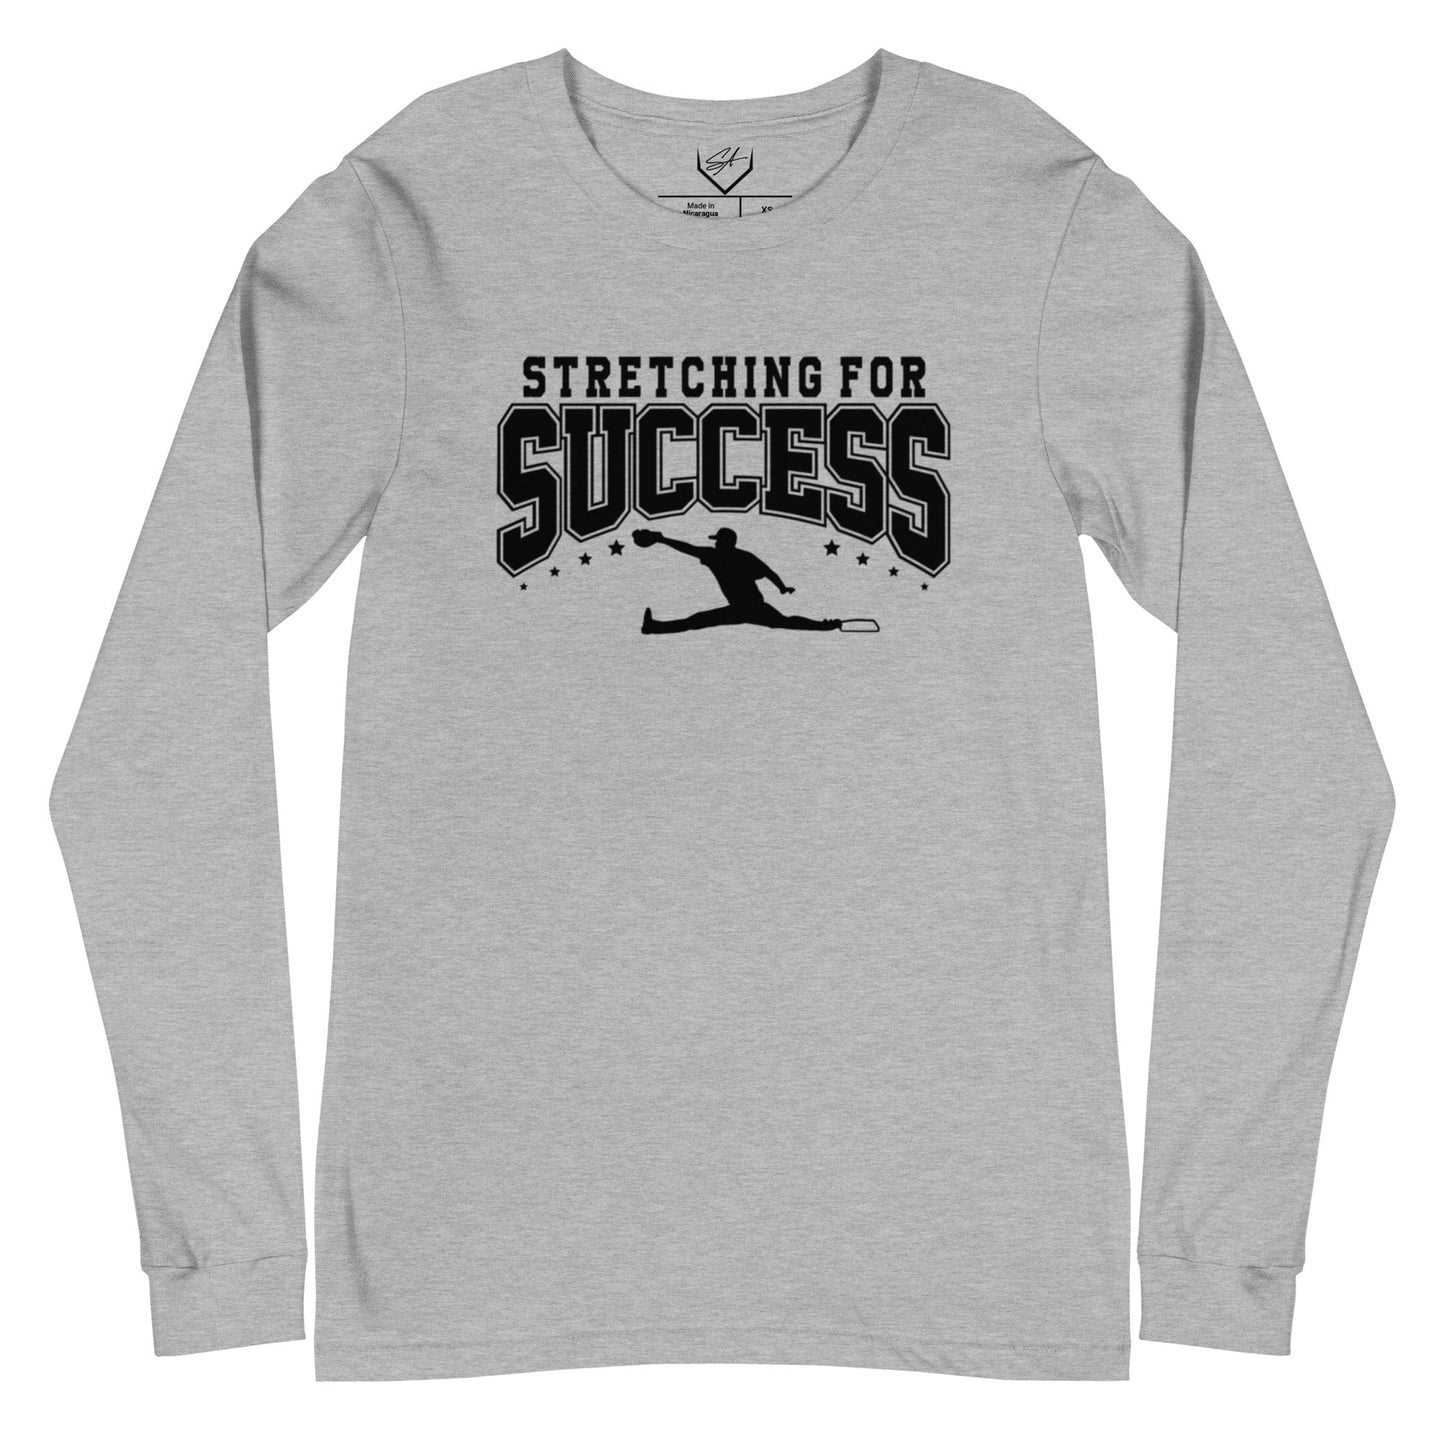 Stretching For Success - Adult Long Sleeve